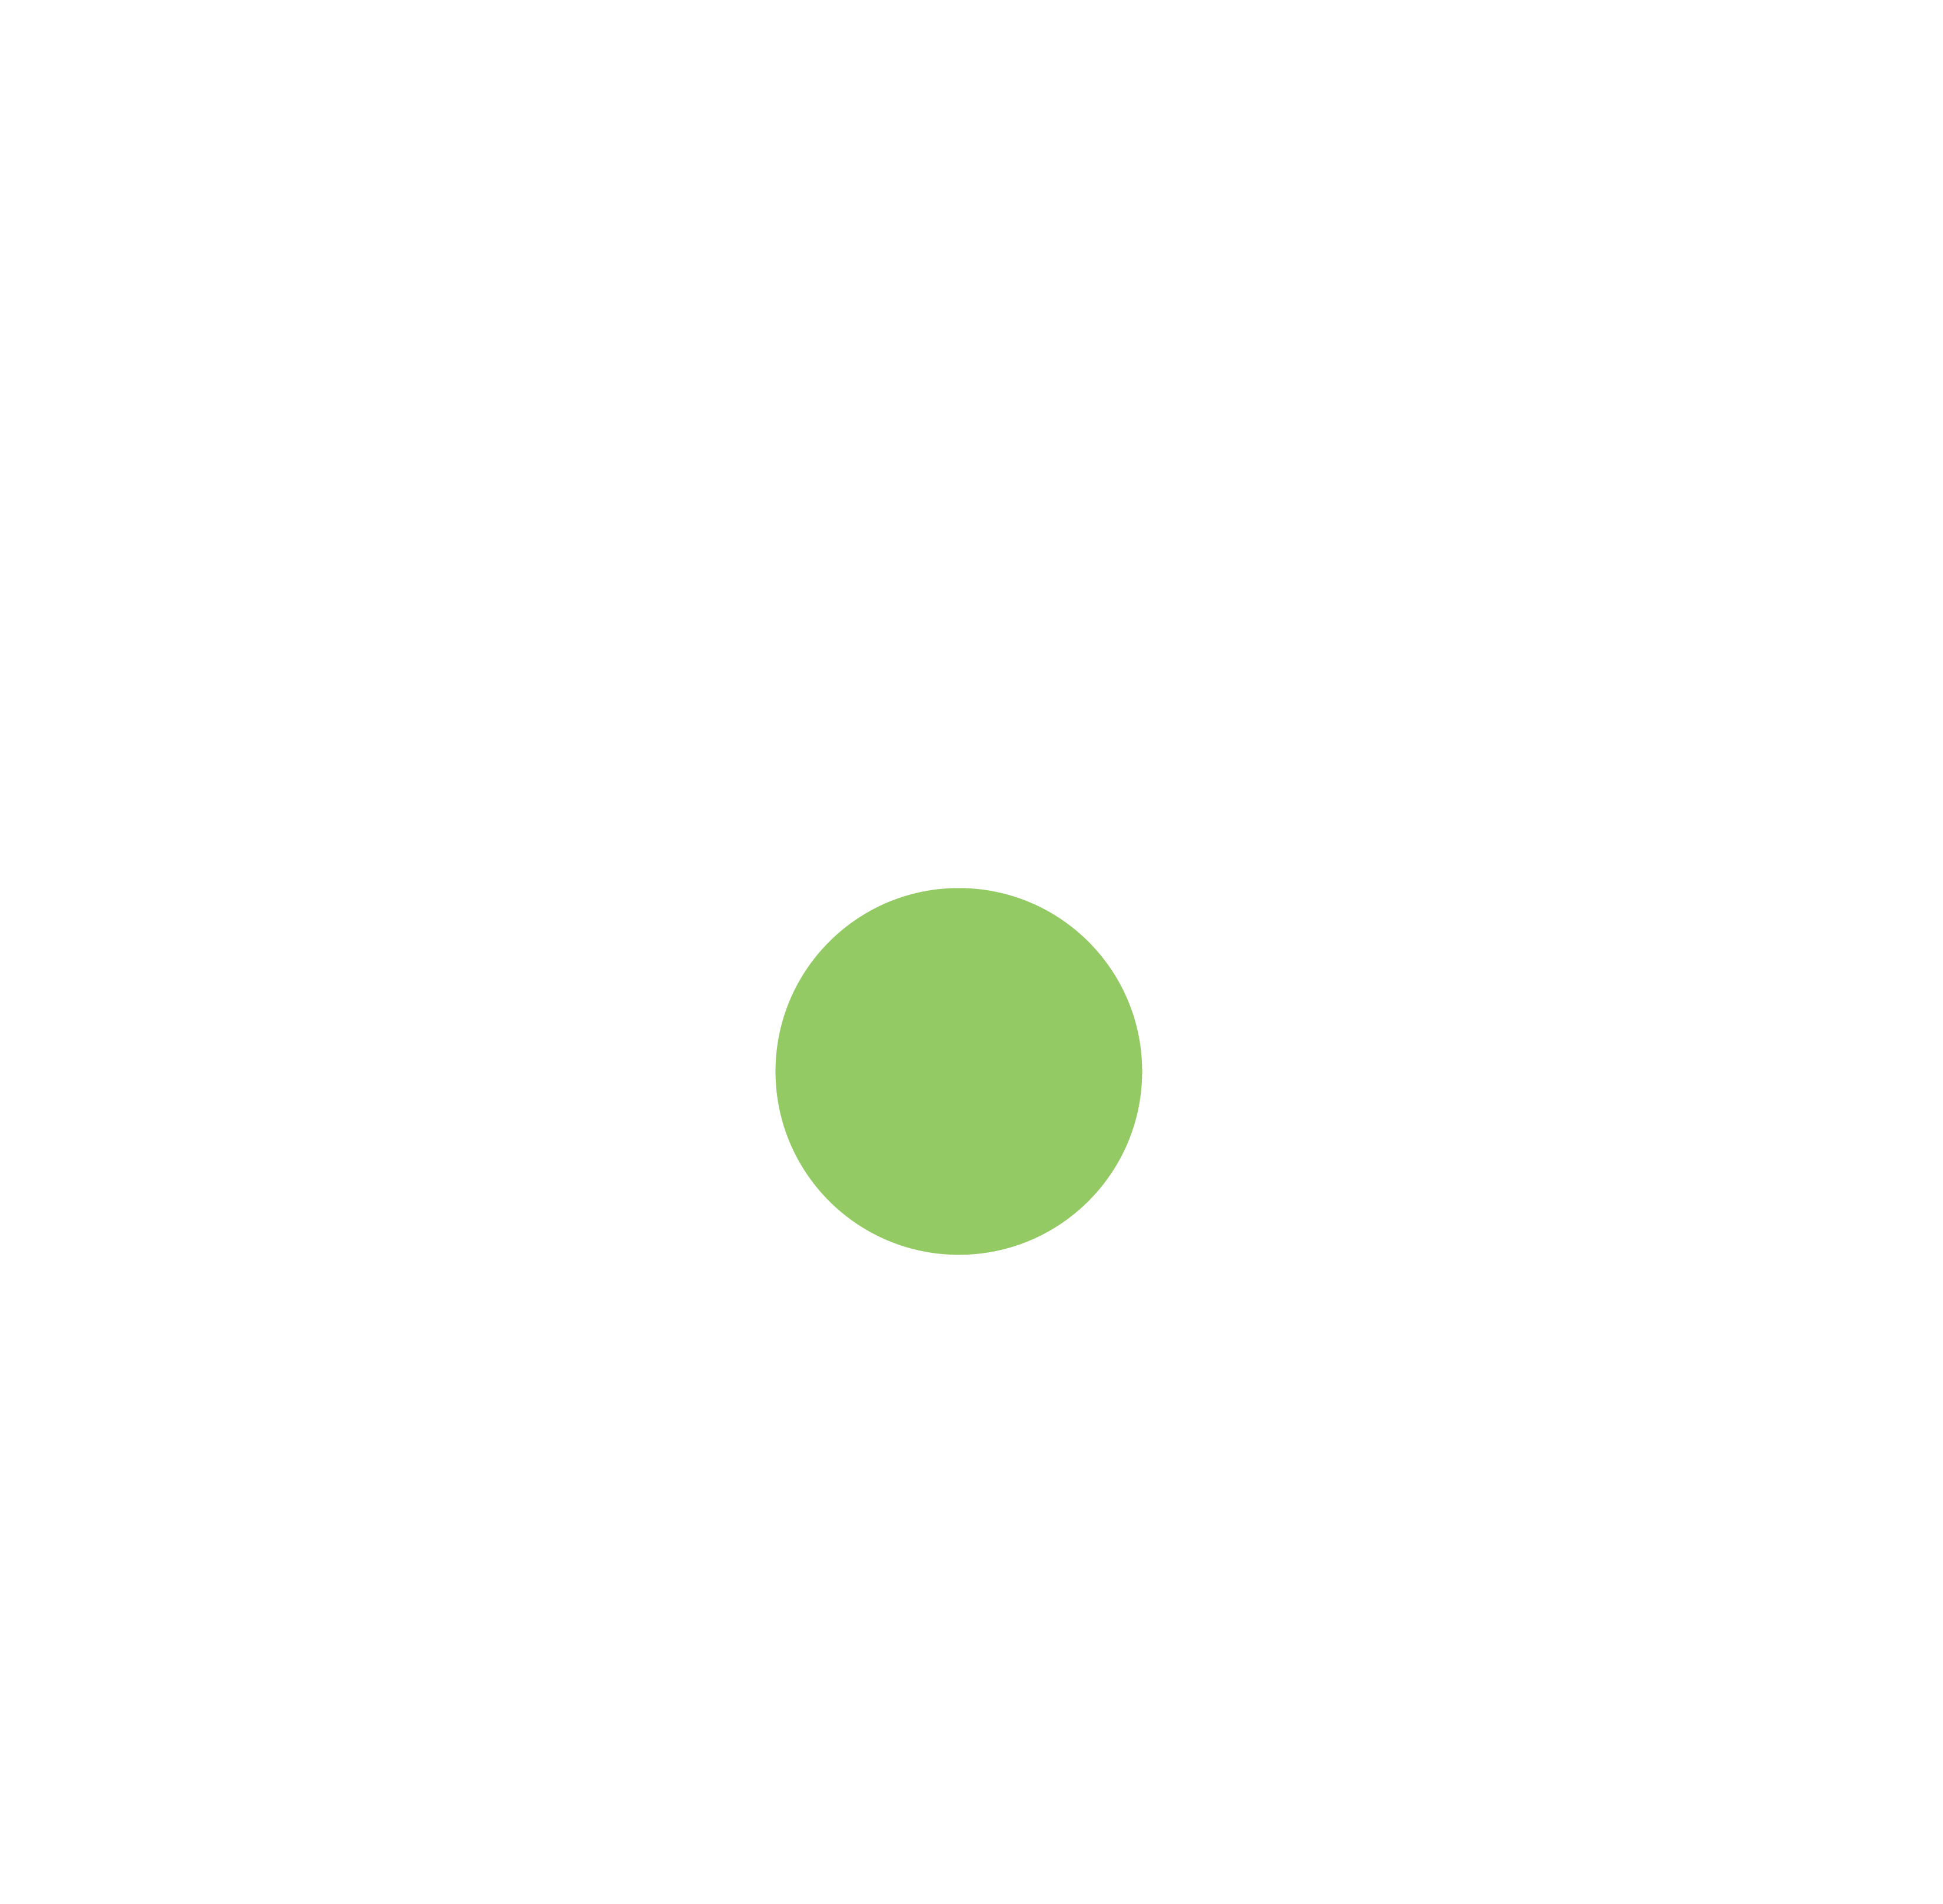 Appreciation for Our Communities and YOU Then and Now